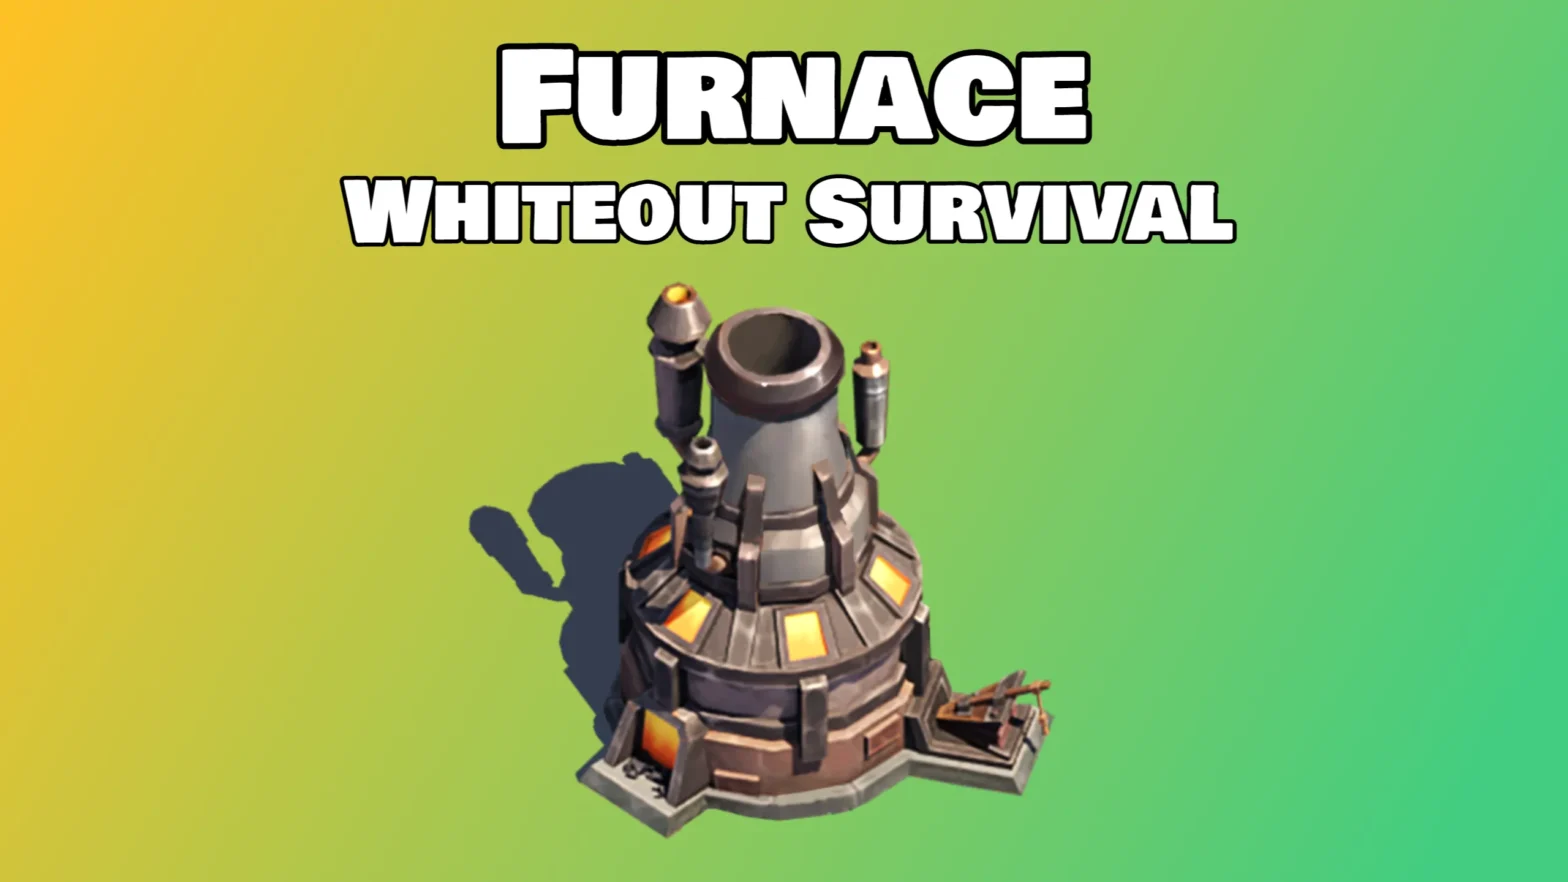 Furnace Whiteout Survival